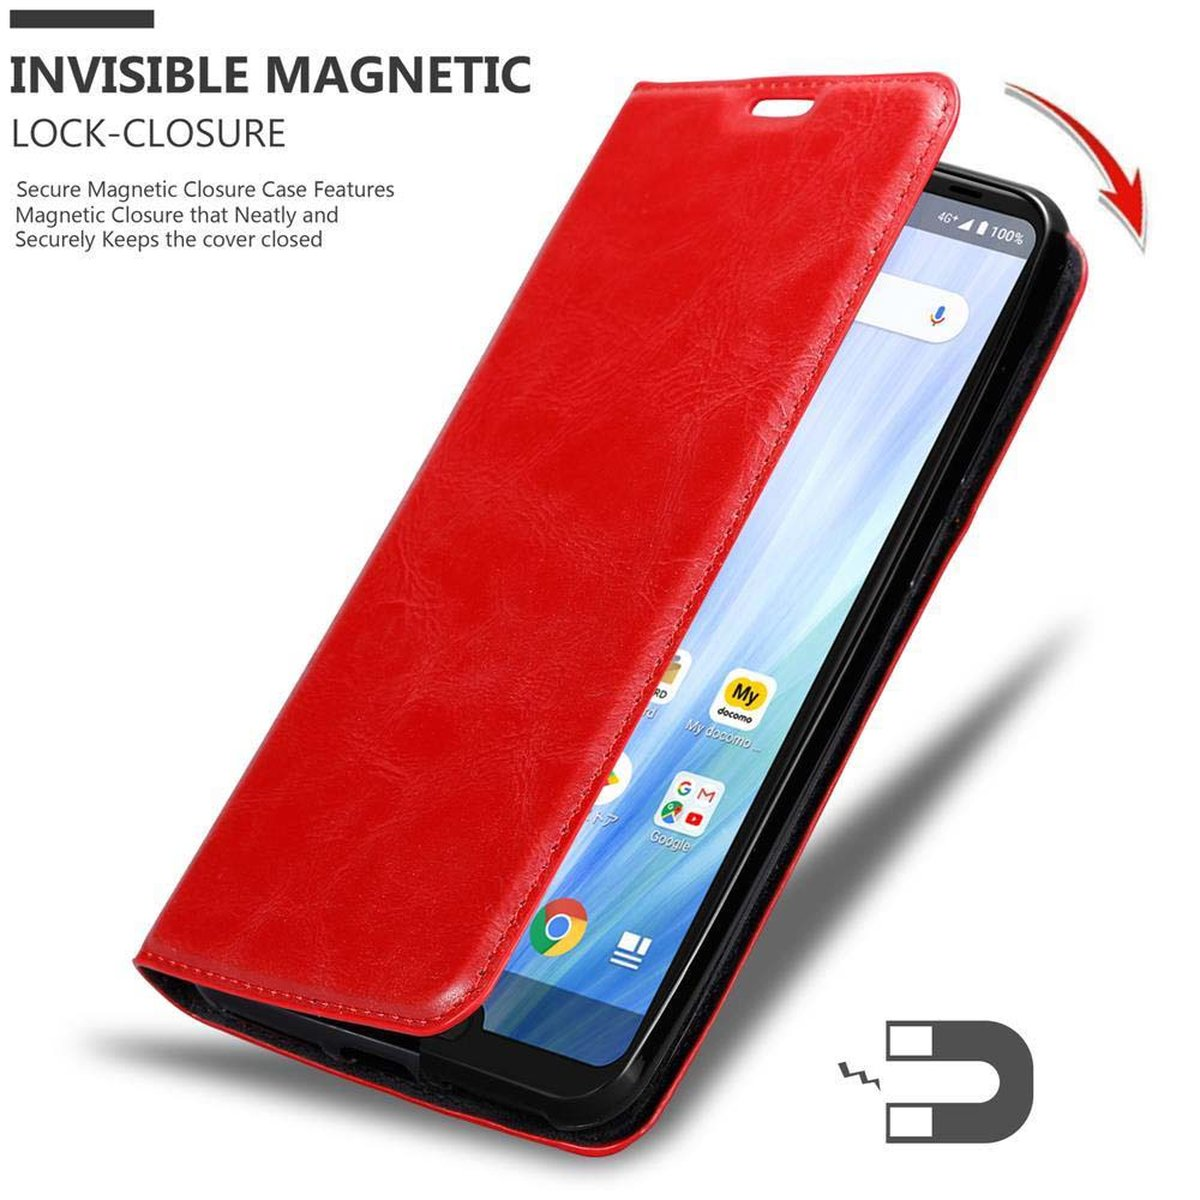 Magnet, Book R3, Aquos Hülle Bookcover, Sharp, CADORABO ROT Invisible APFEL